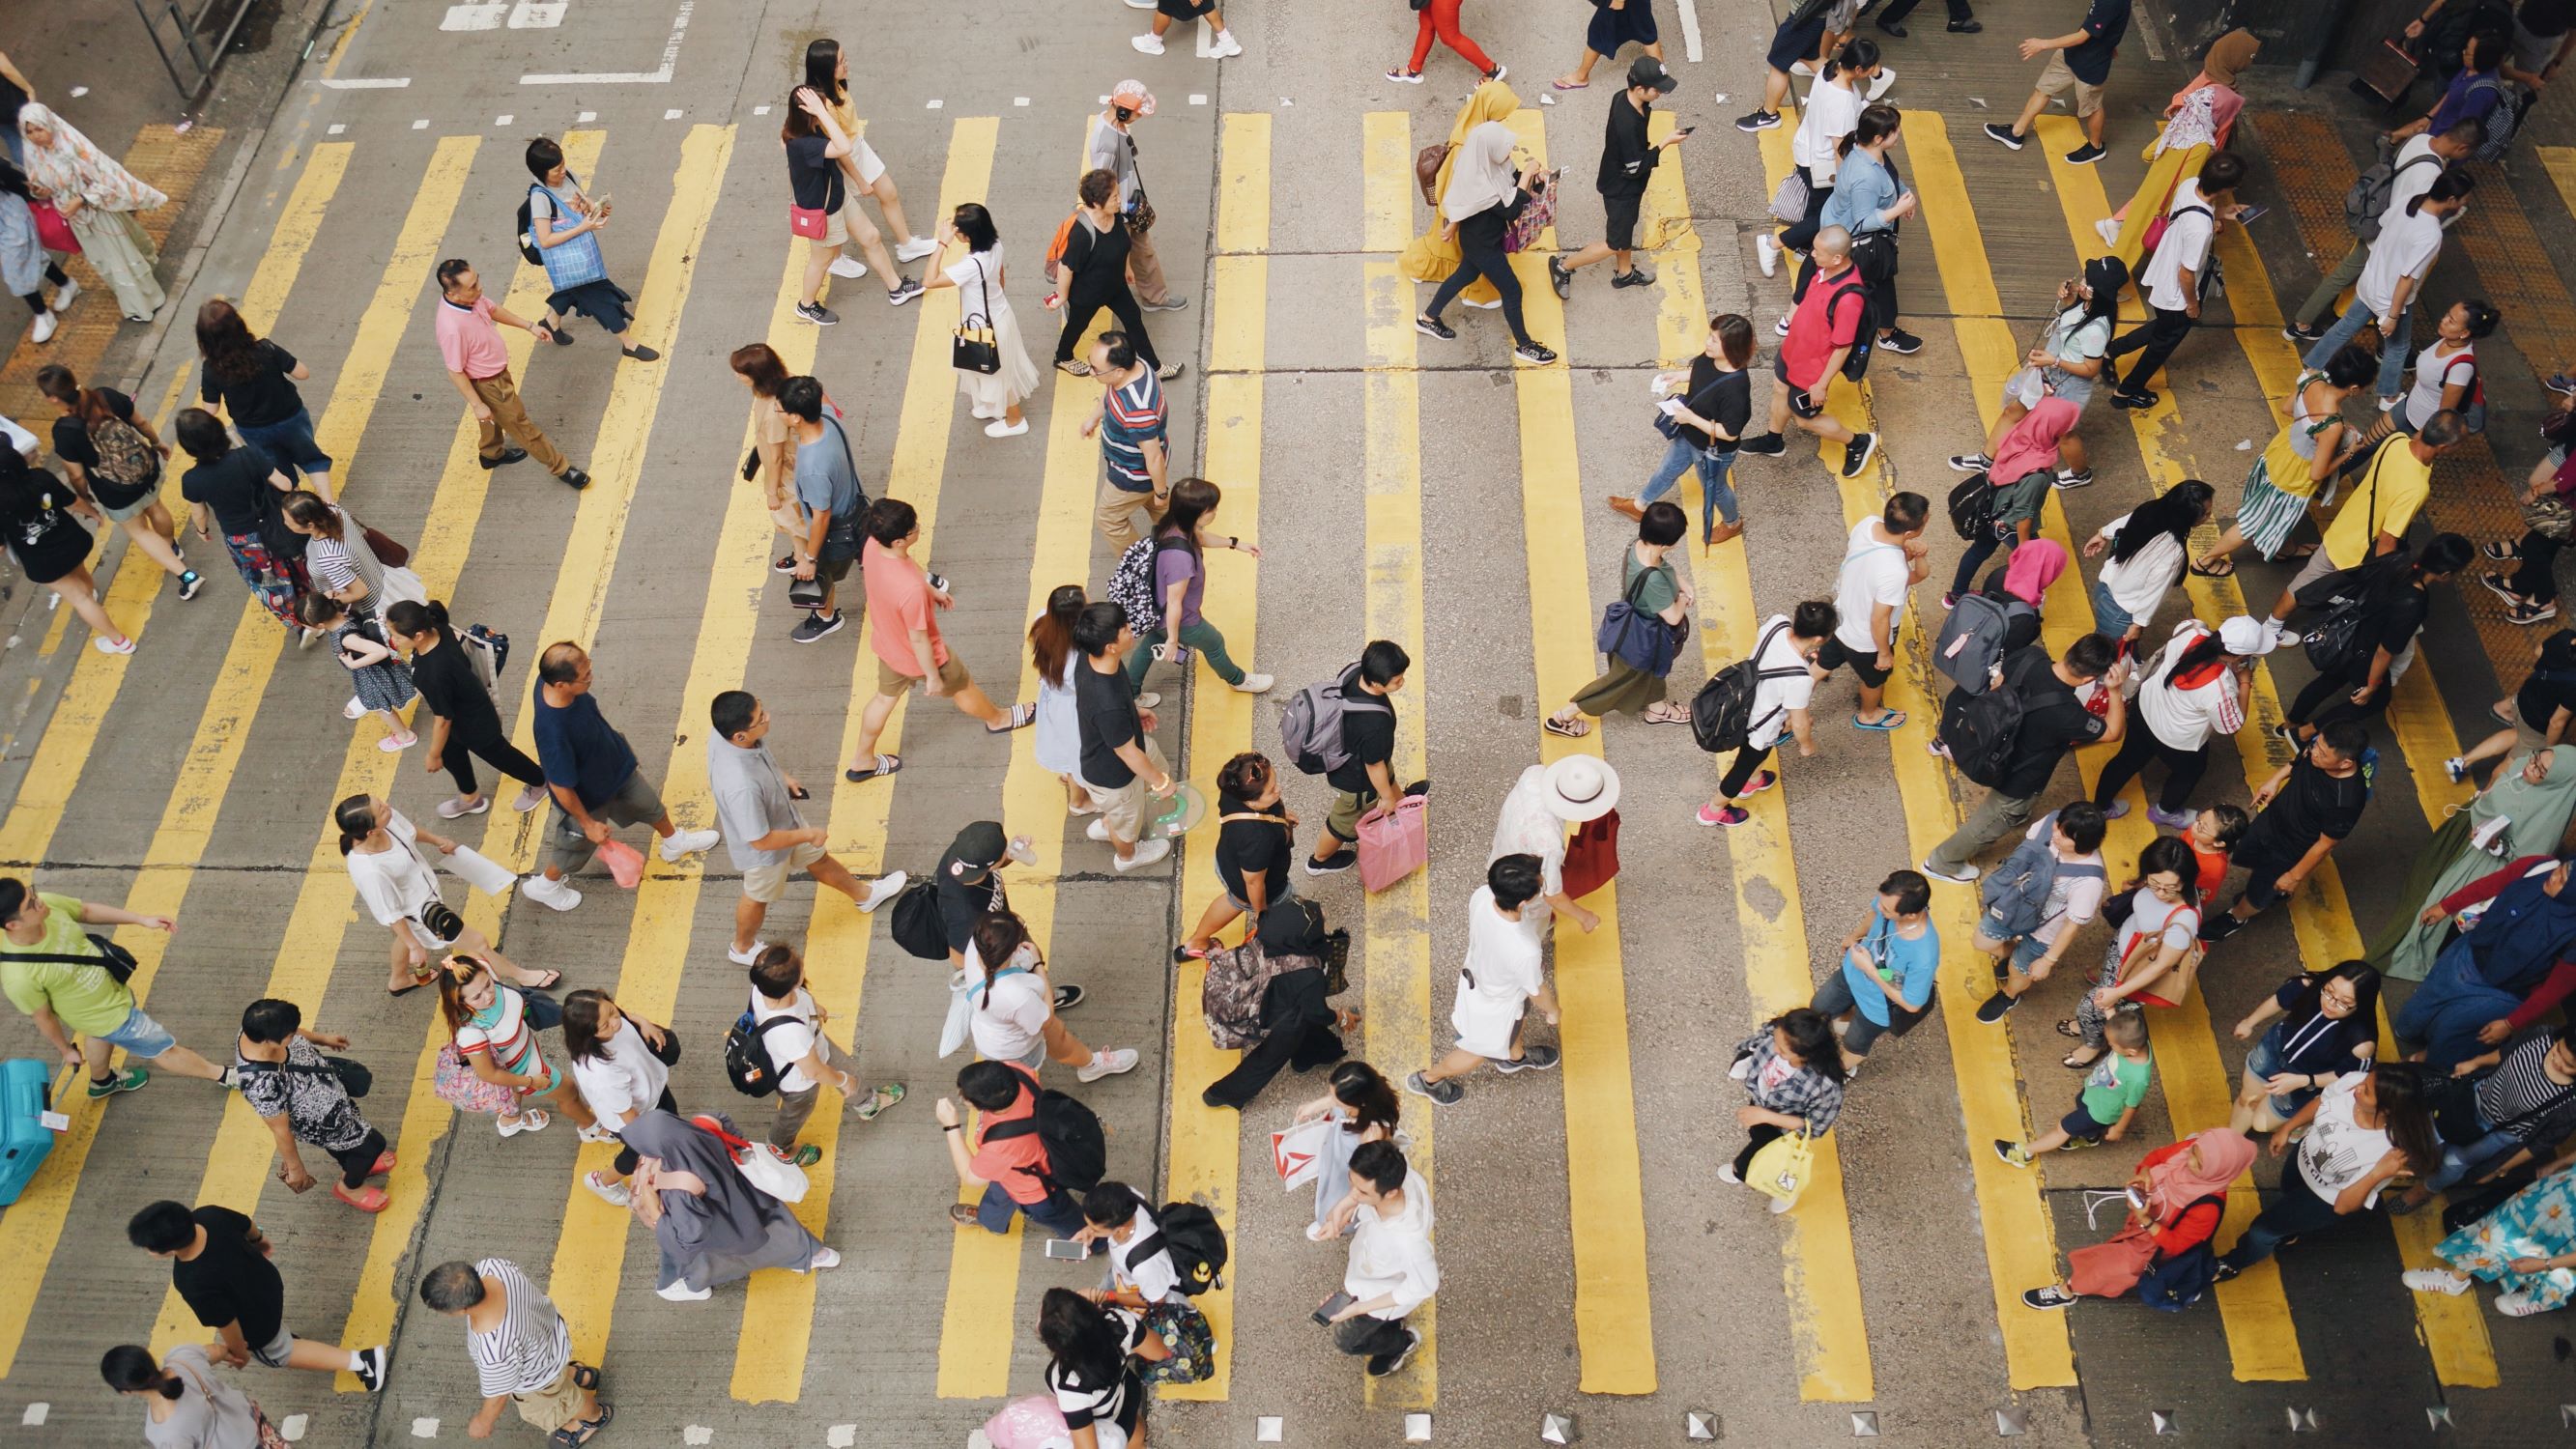 A crowd of people at a yellow crosswalk.